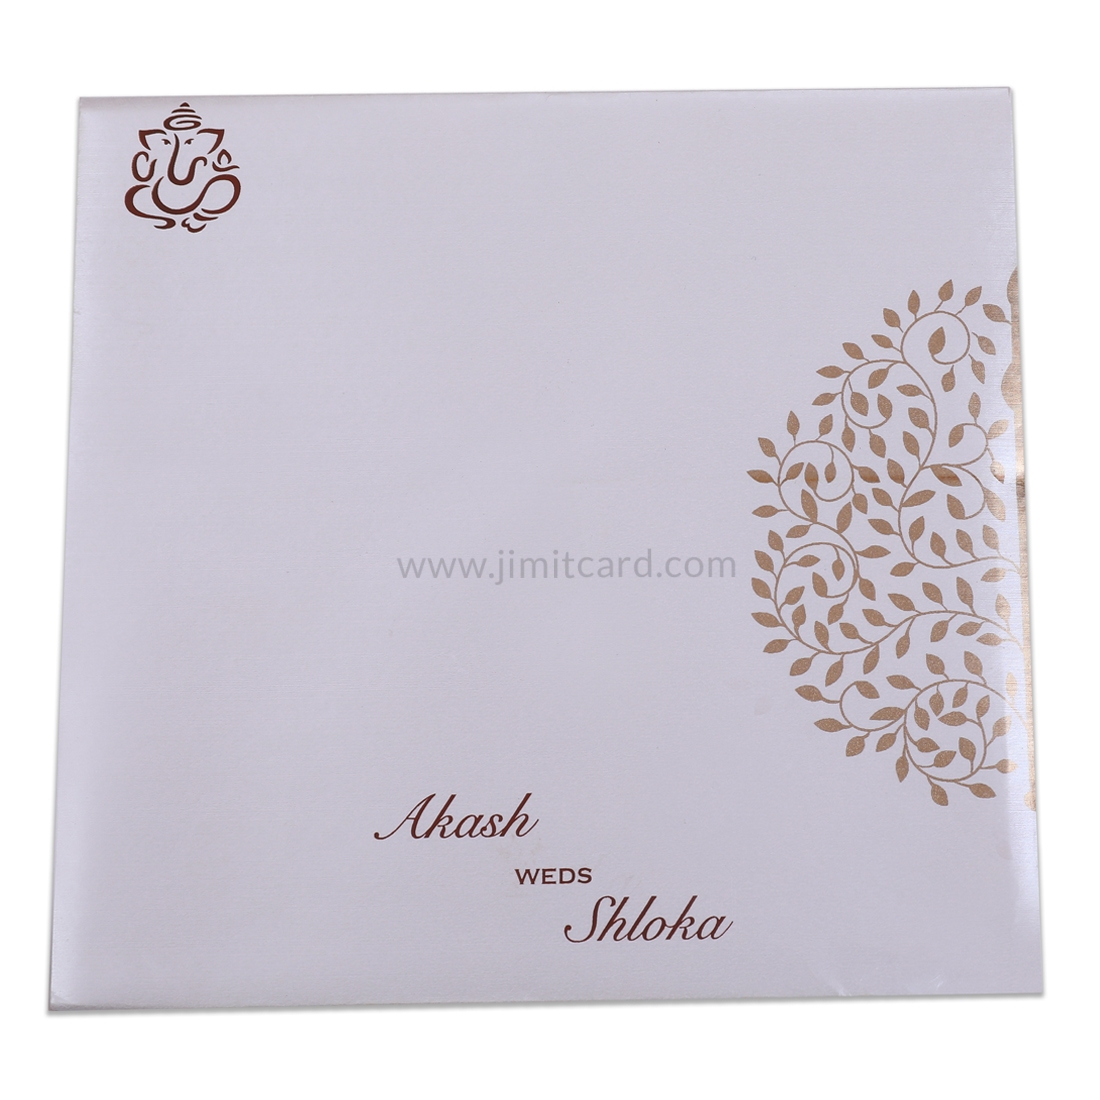 Silver Door Open Style Wedding Invitation Card With Embedded Design of Leaves in Circle-13020